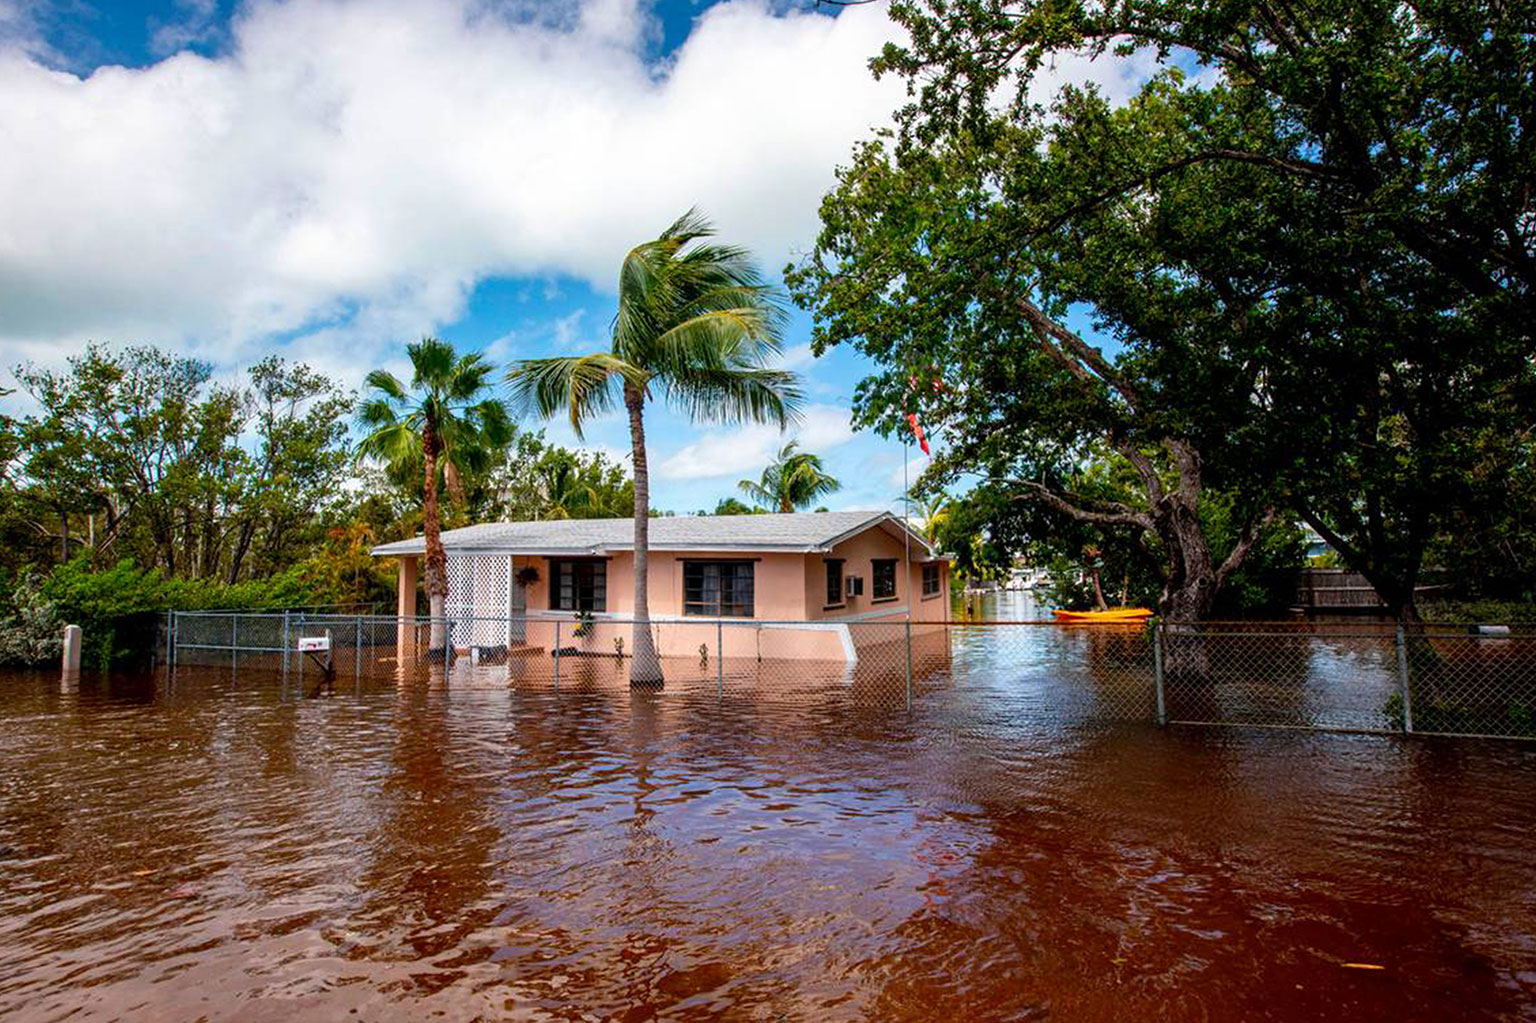 A pink Florida home, with palm trees in its front yard, flooded with water